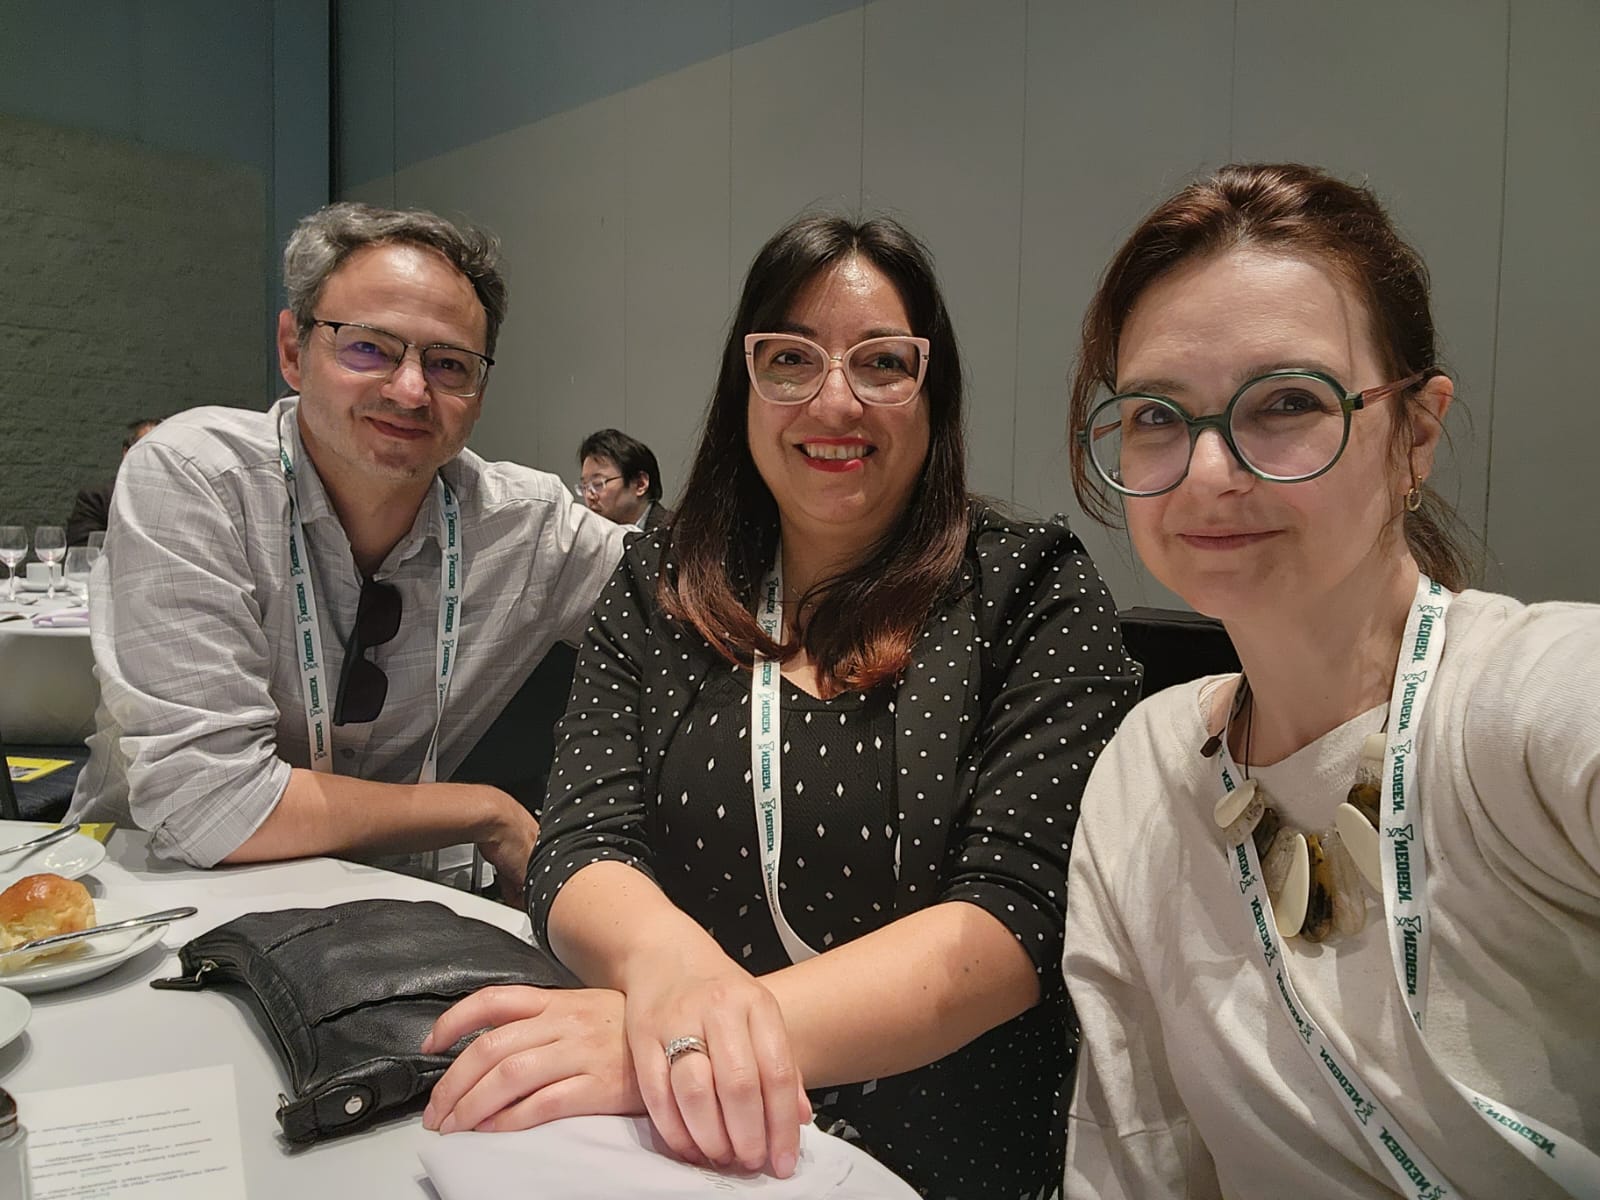 From left to right: Dr. Celso Oliveira (UFPB, Brazil), Dr. Magaly Toro (JIFSAN/UMD, US) and Dr. Raquel Bonelli (UFRJ, Brazil), at IAFP2023, Toronto, Canada.